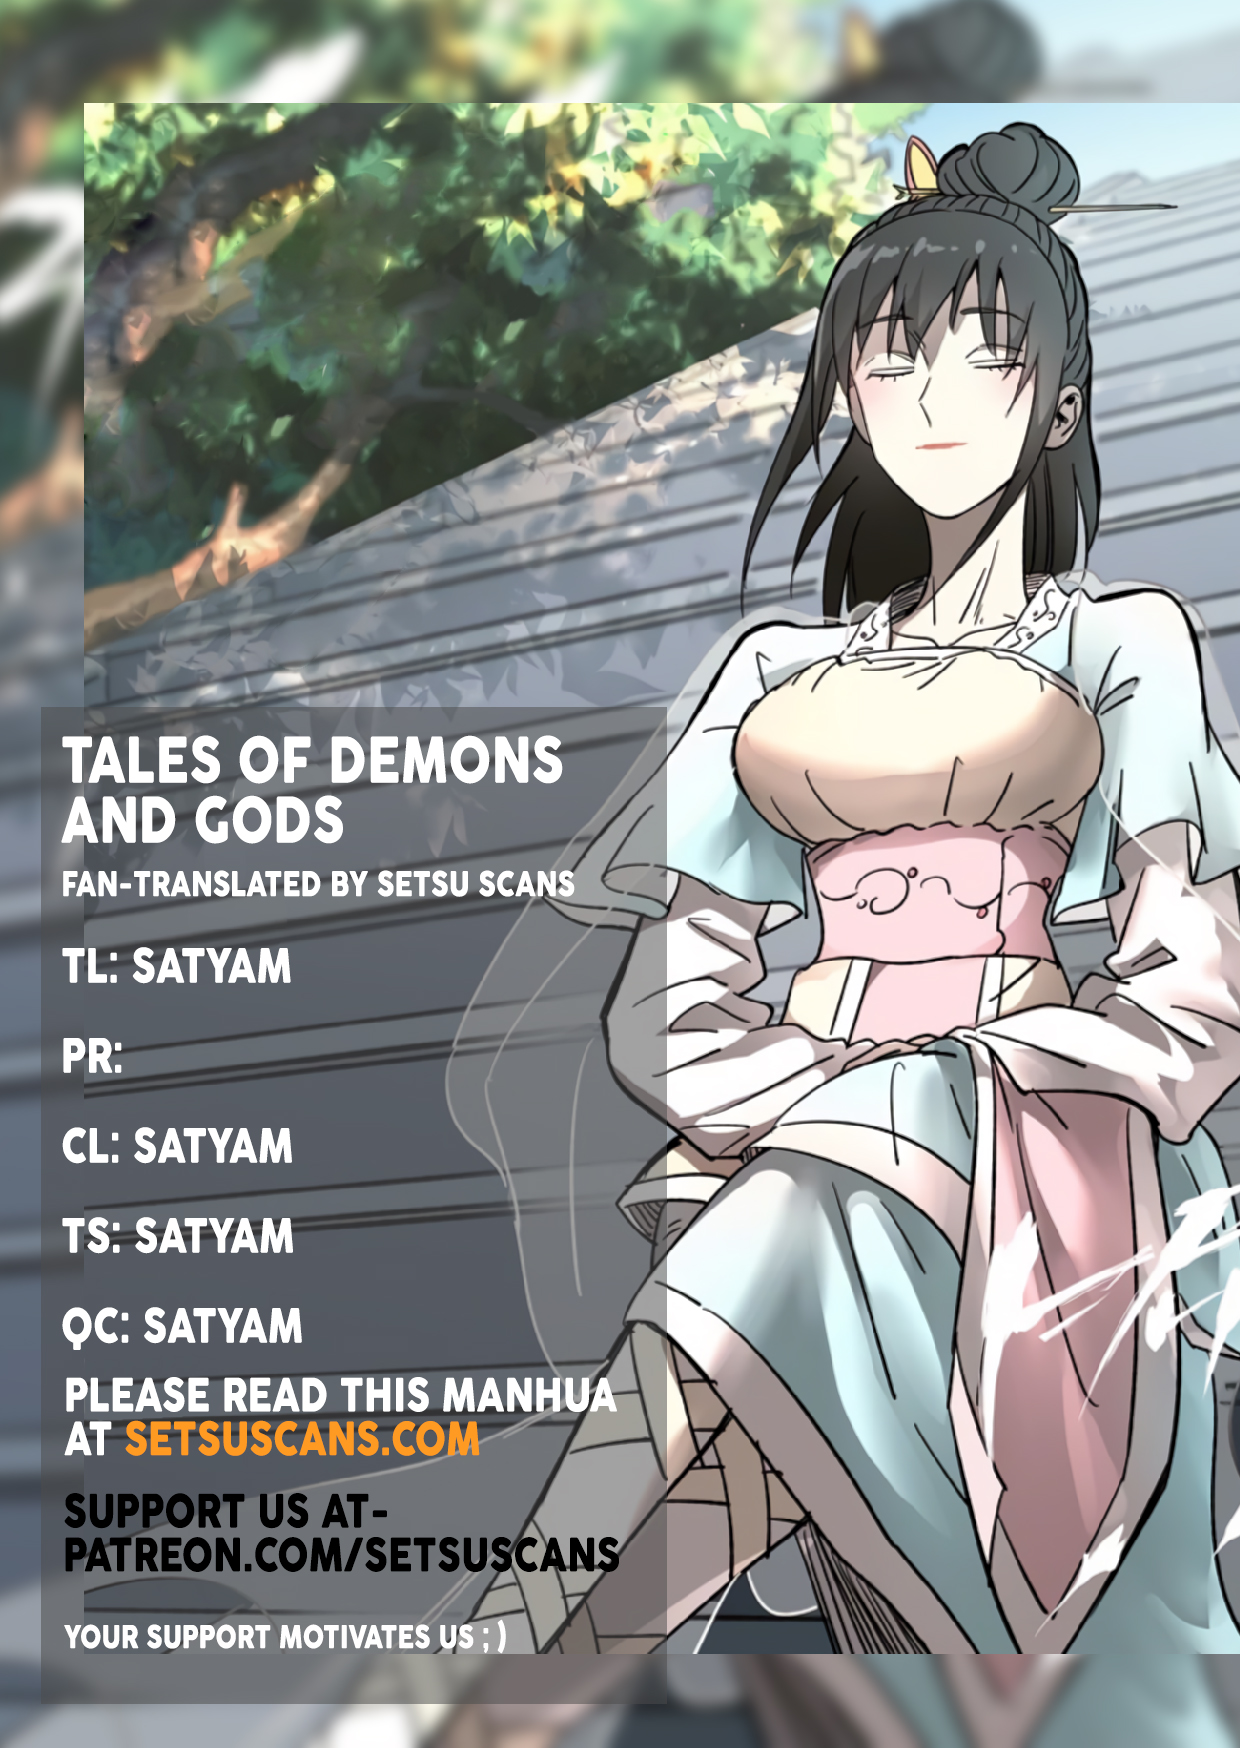 Tales of Demons and Gods - Chapter 30342 - Divine Soul Dao Art (1) - Image 1